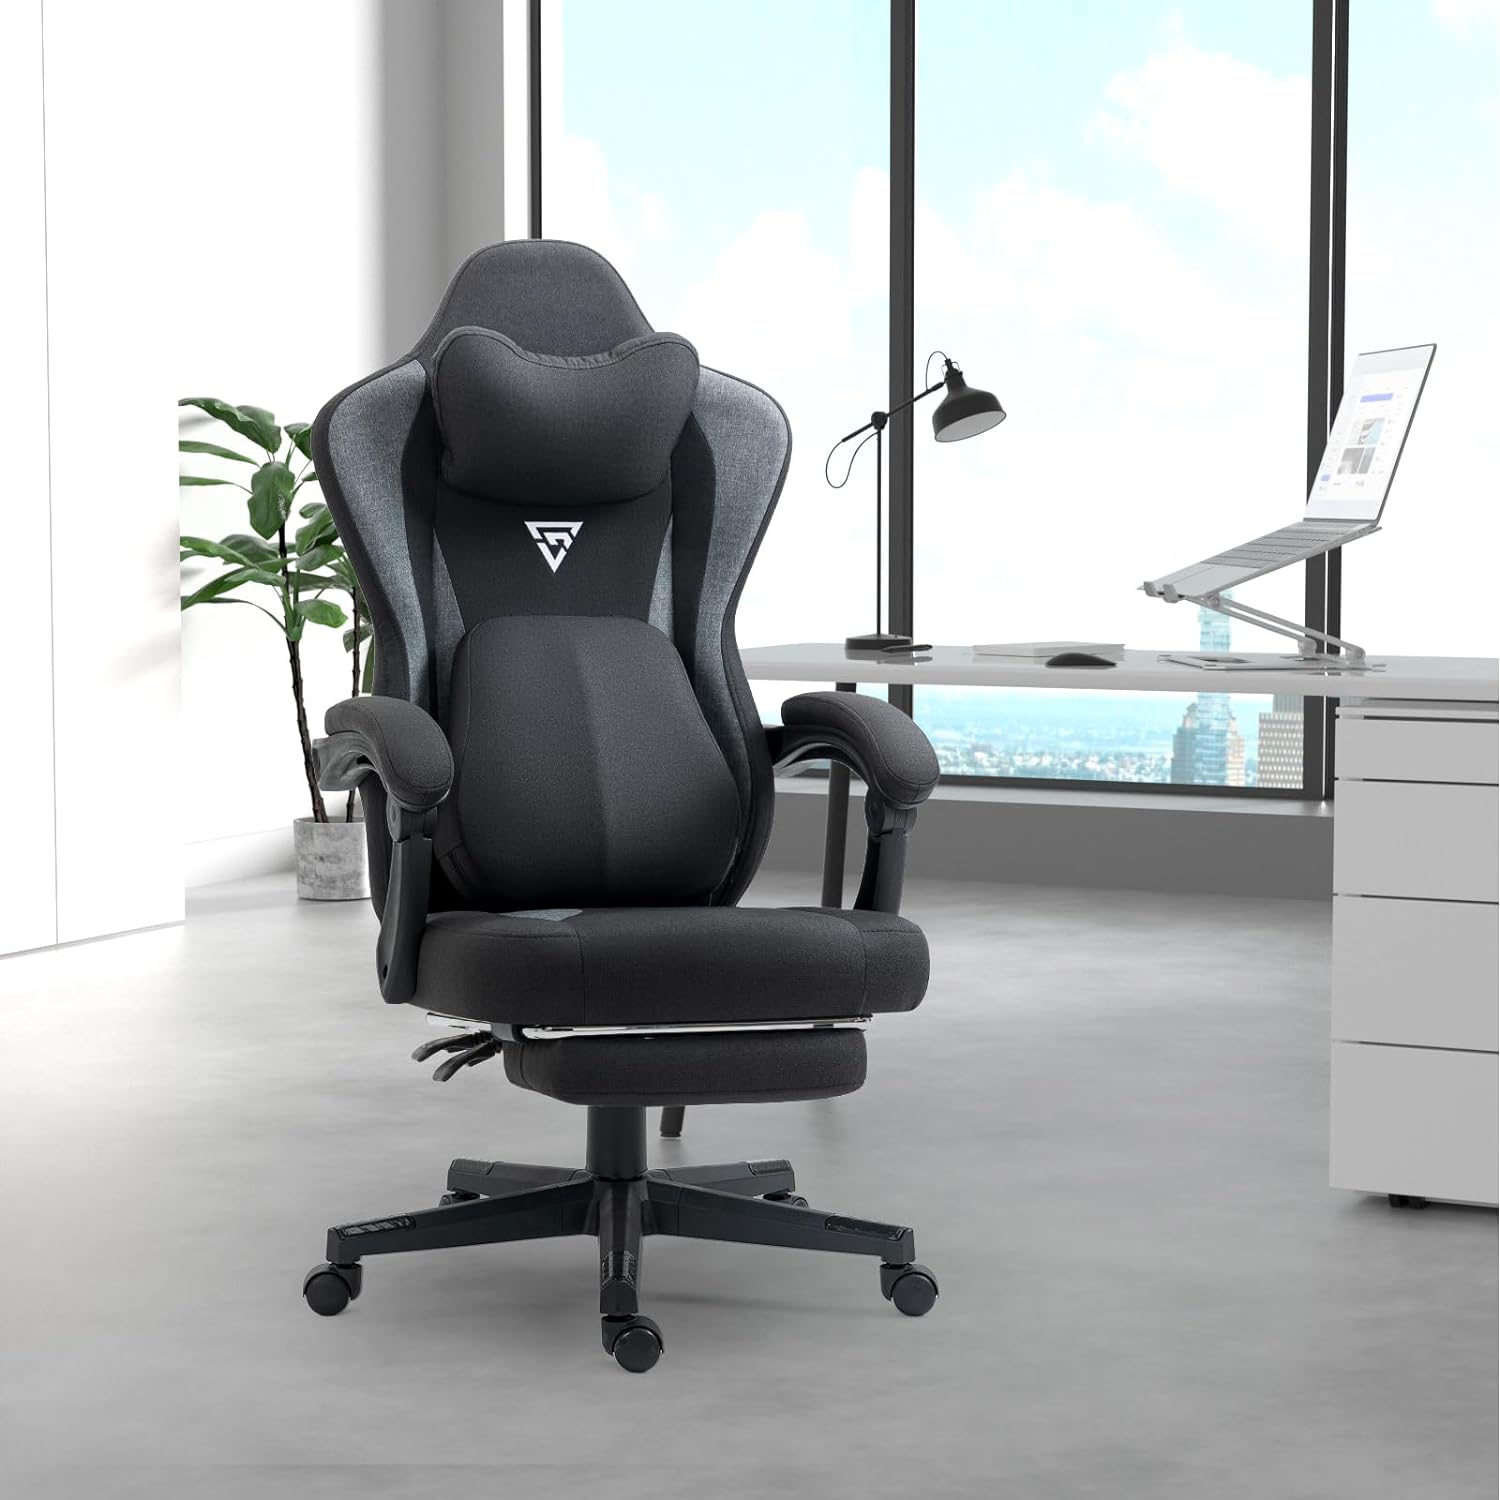 Vigosit Gaming Chair with Heated Massage Lumbar Support, Breathable Fabric Office Chair with Pocket Spring Cushion and Footrest, Recliner High Back PC Chair for Adult Black